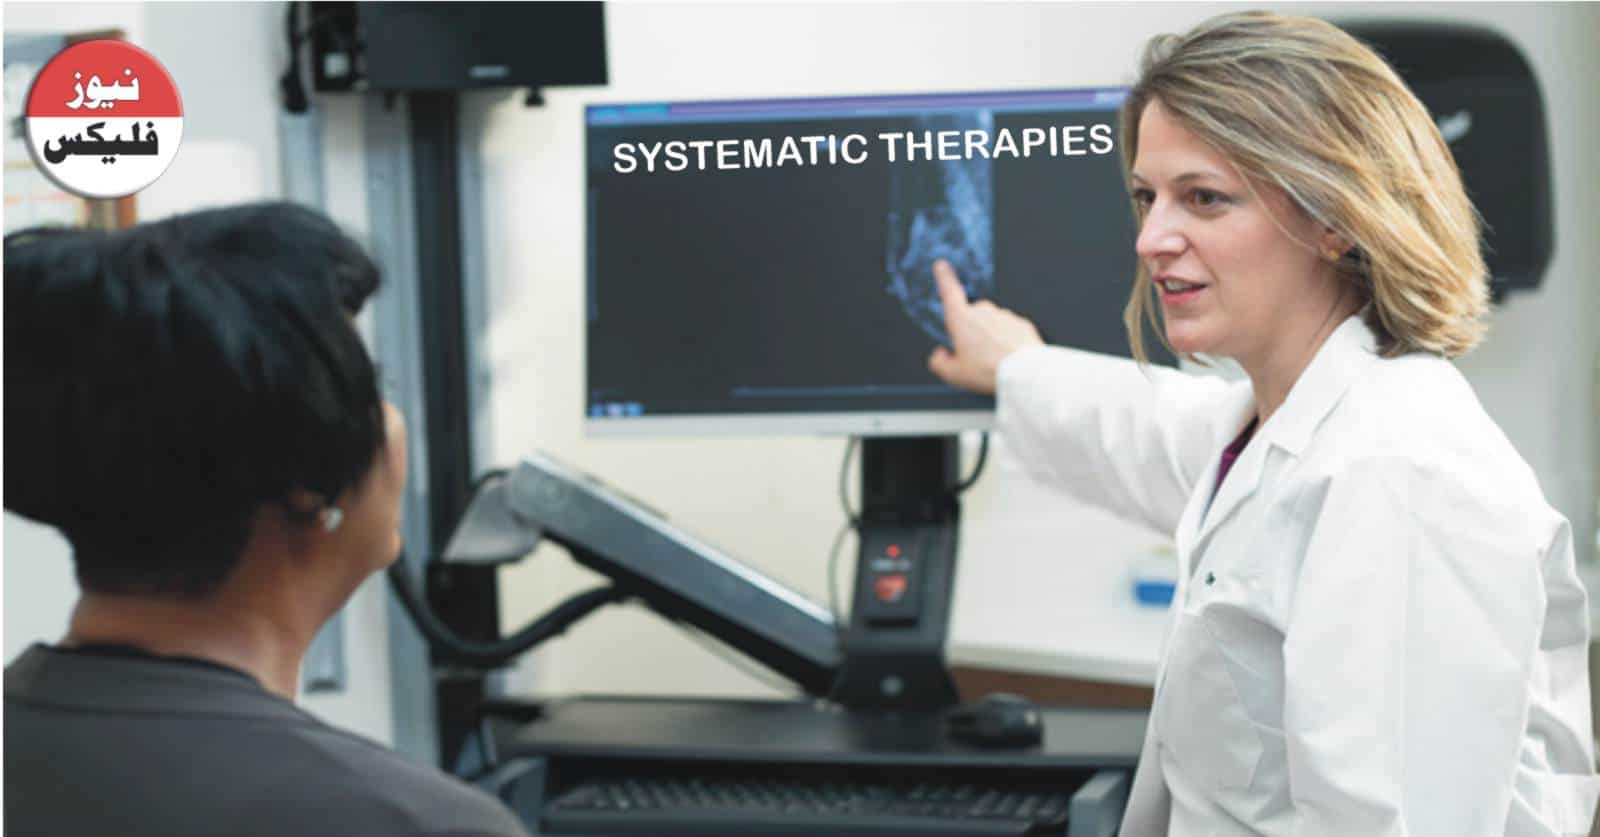 SYSTEMATIC THERAPIES